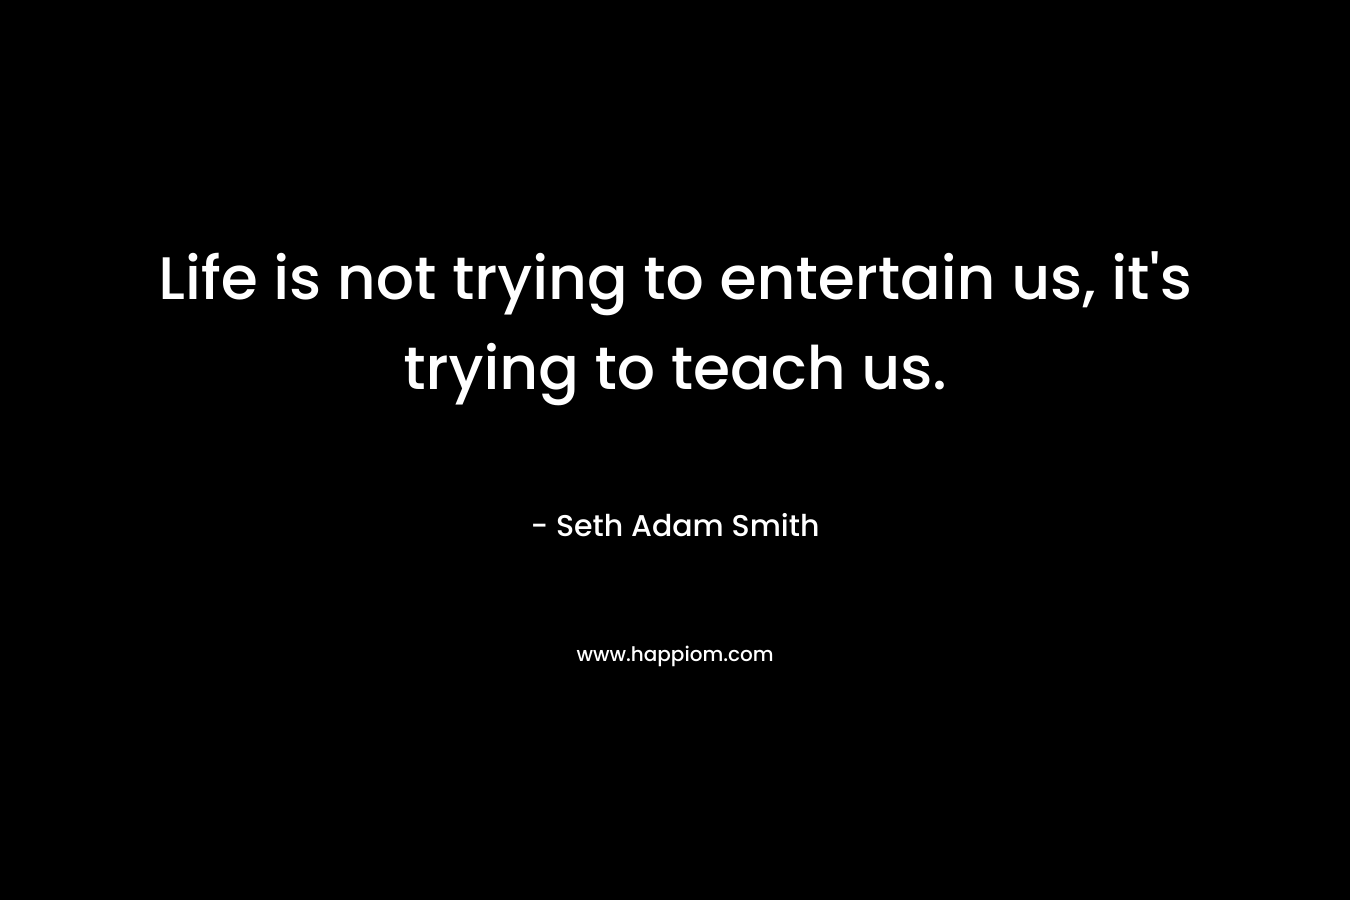 Life is not trying to entertain us, it’s trying to teach us. – Seth Adam Smith